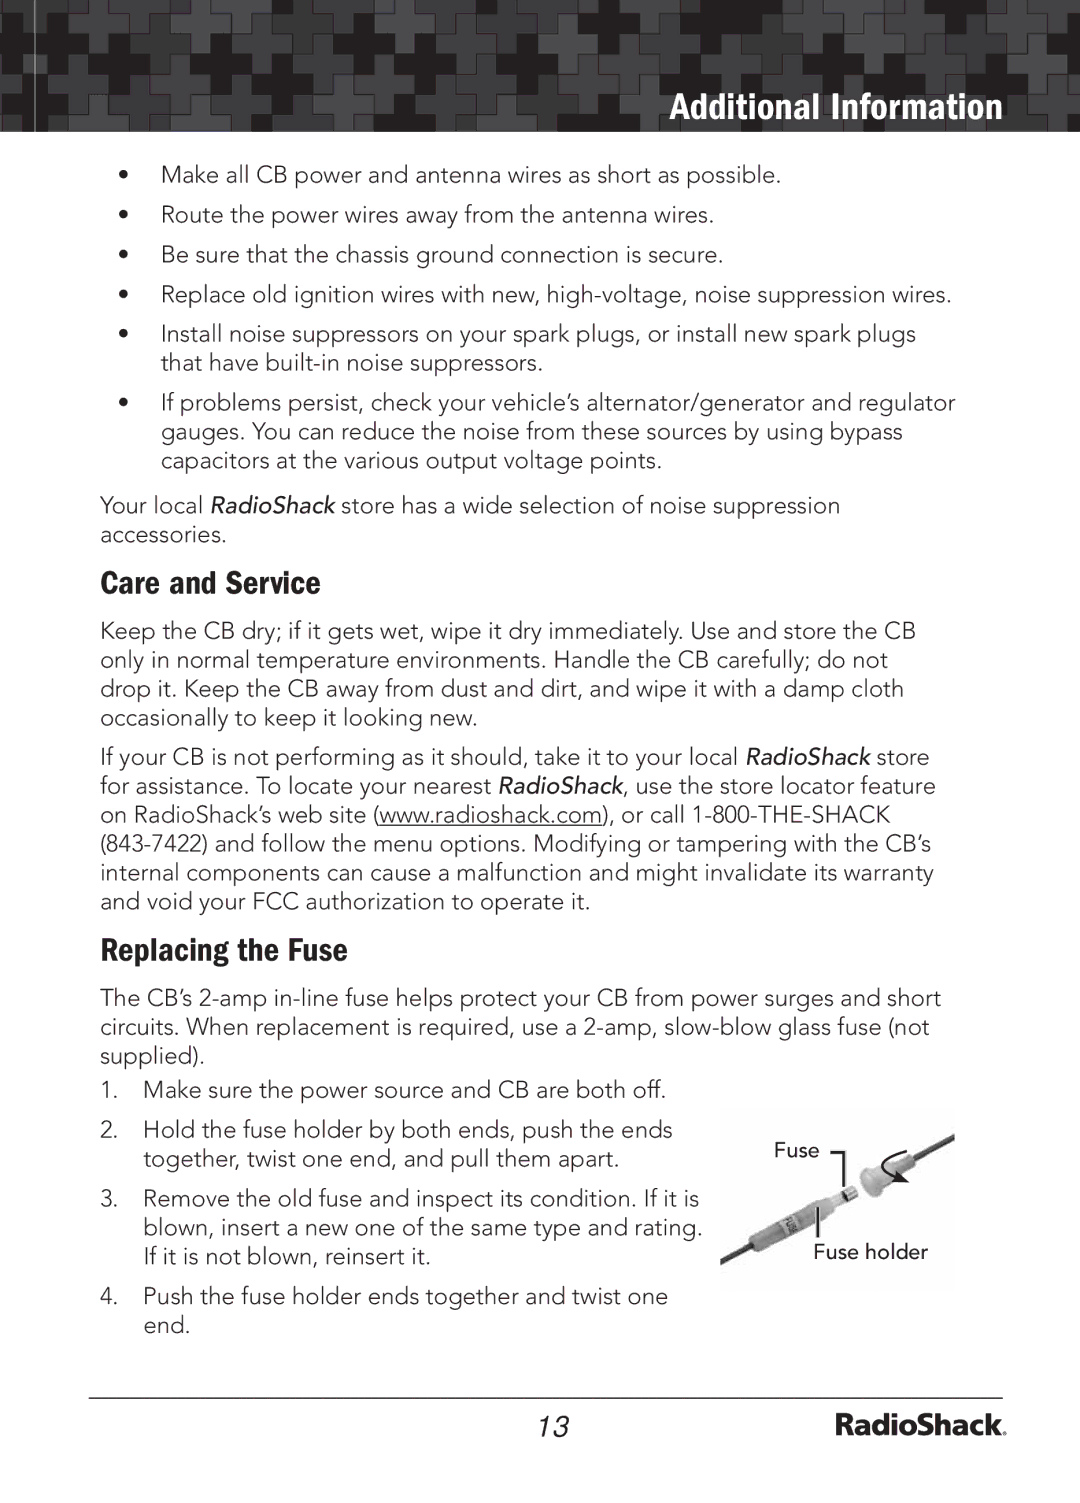 Radio Shack 21-1703 A manual Care and Service, Replacing the Fuse 